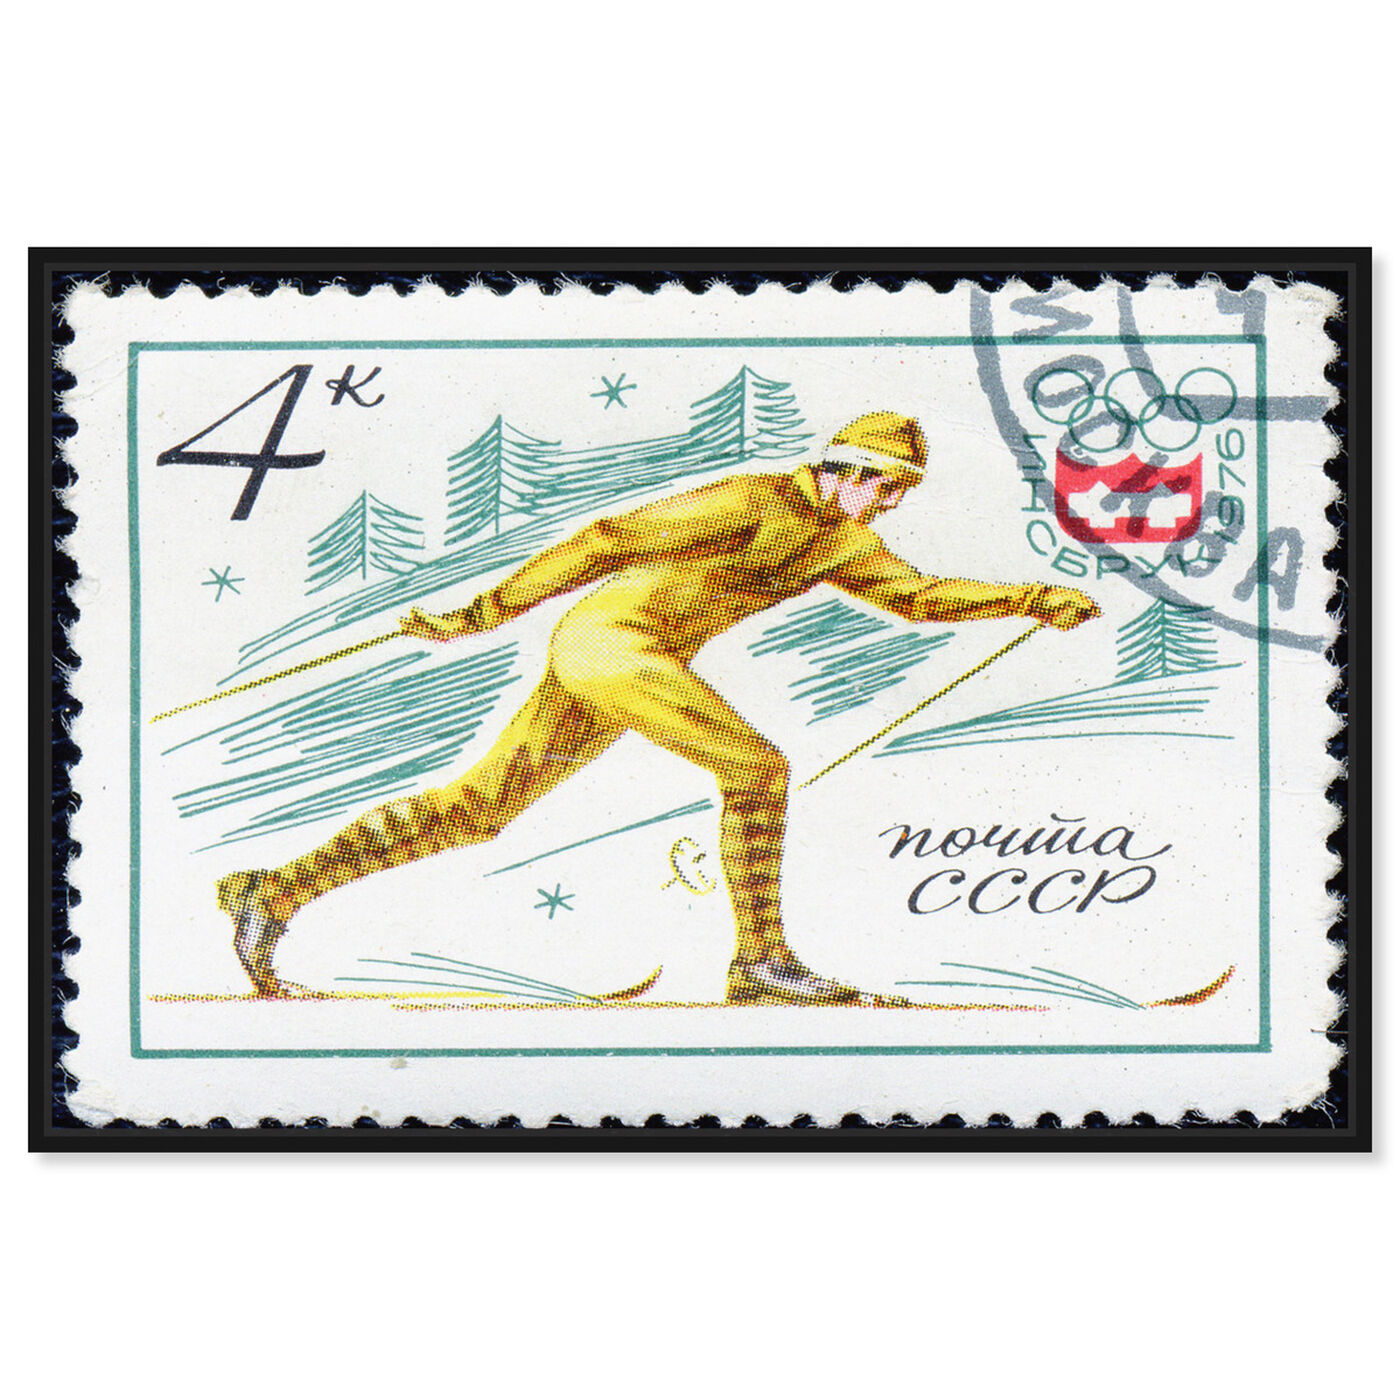 Front view of 1976 XII featuring sports and teams and skiing art.